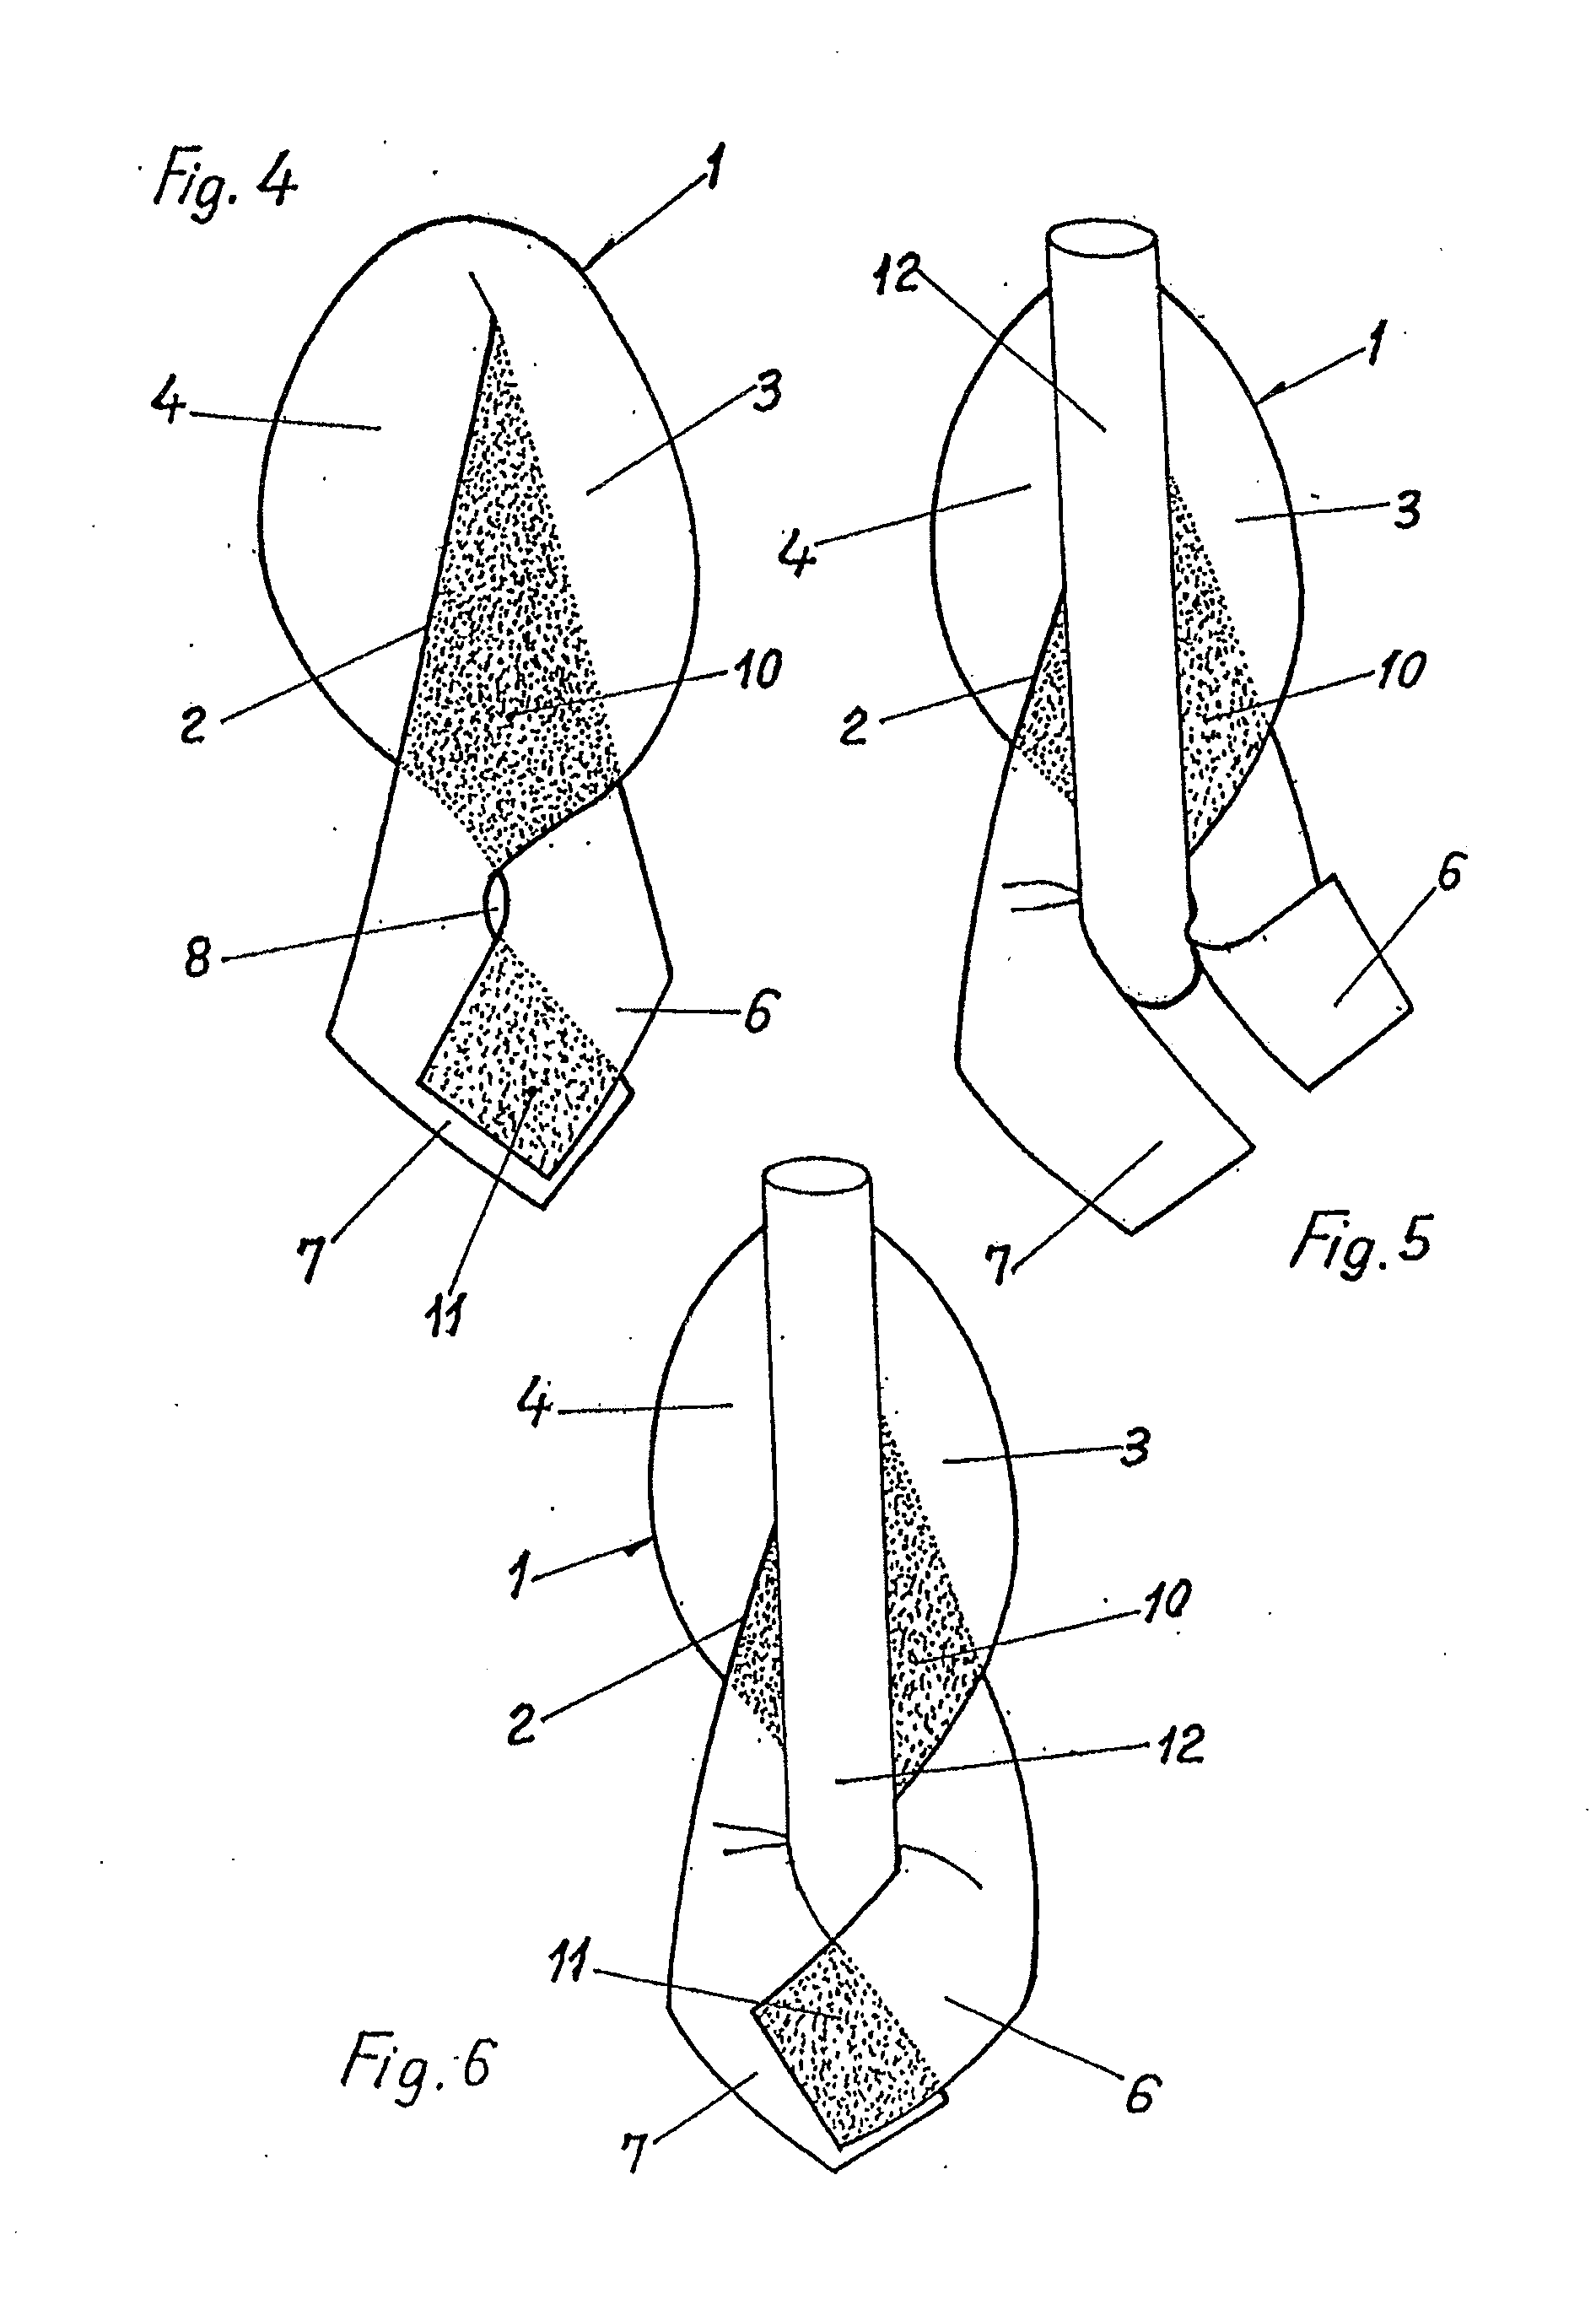 Prosthesis and method for surgical treatment of inguinal hernias